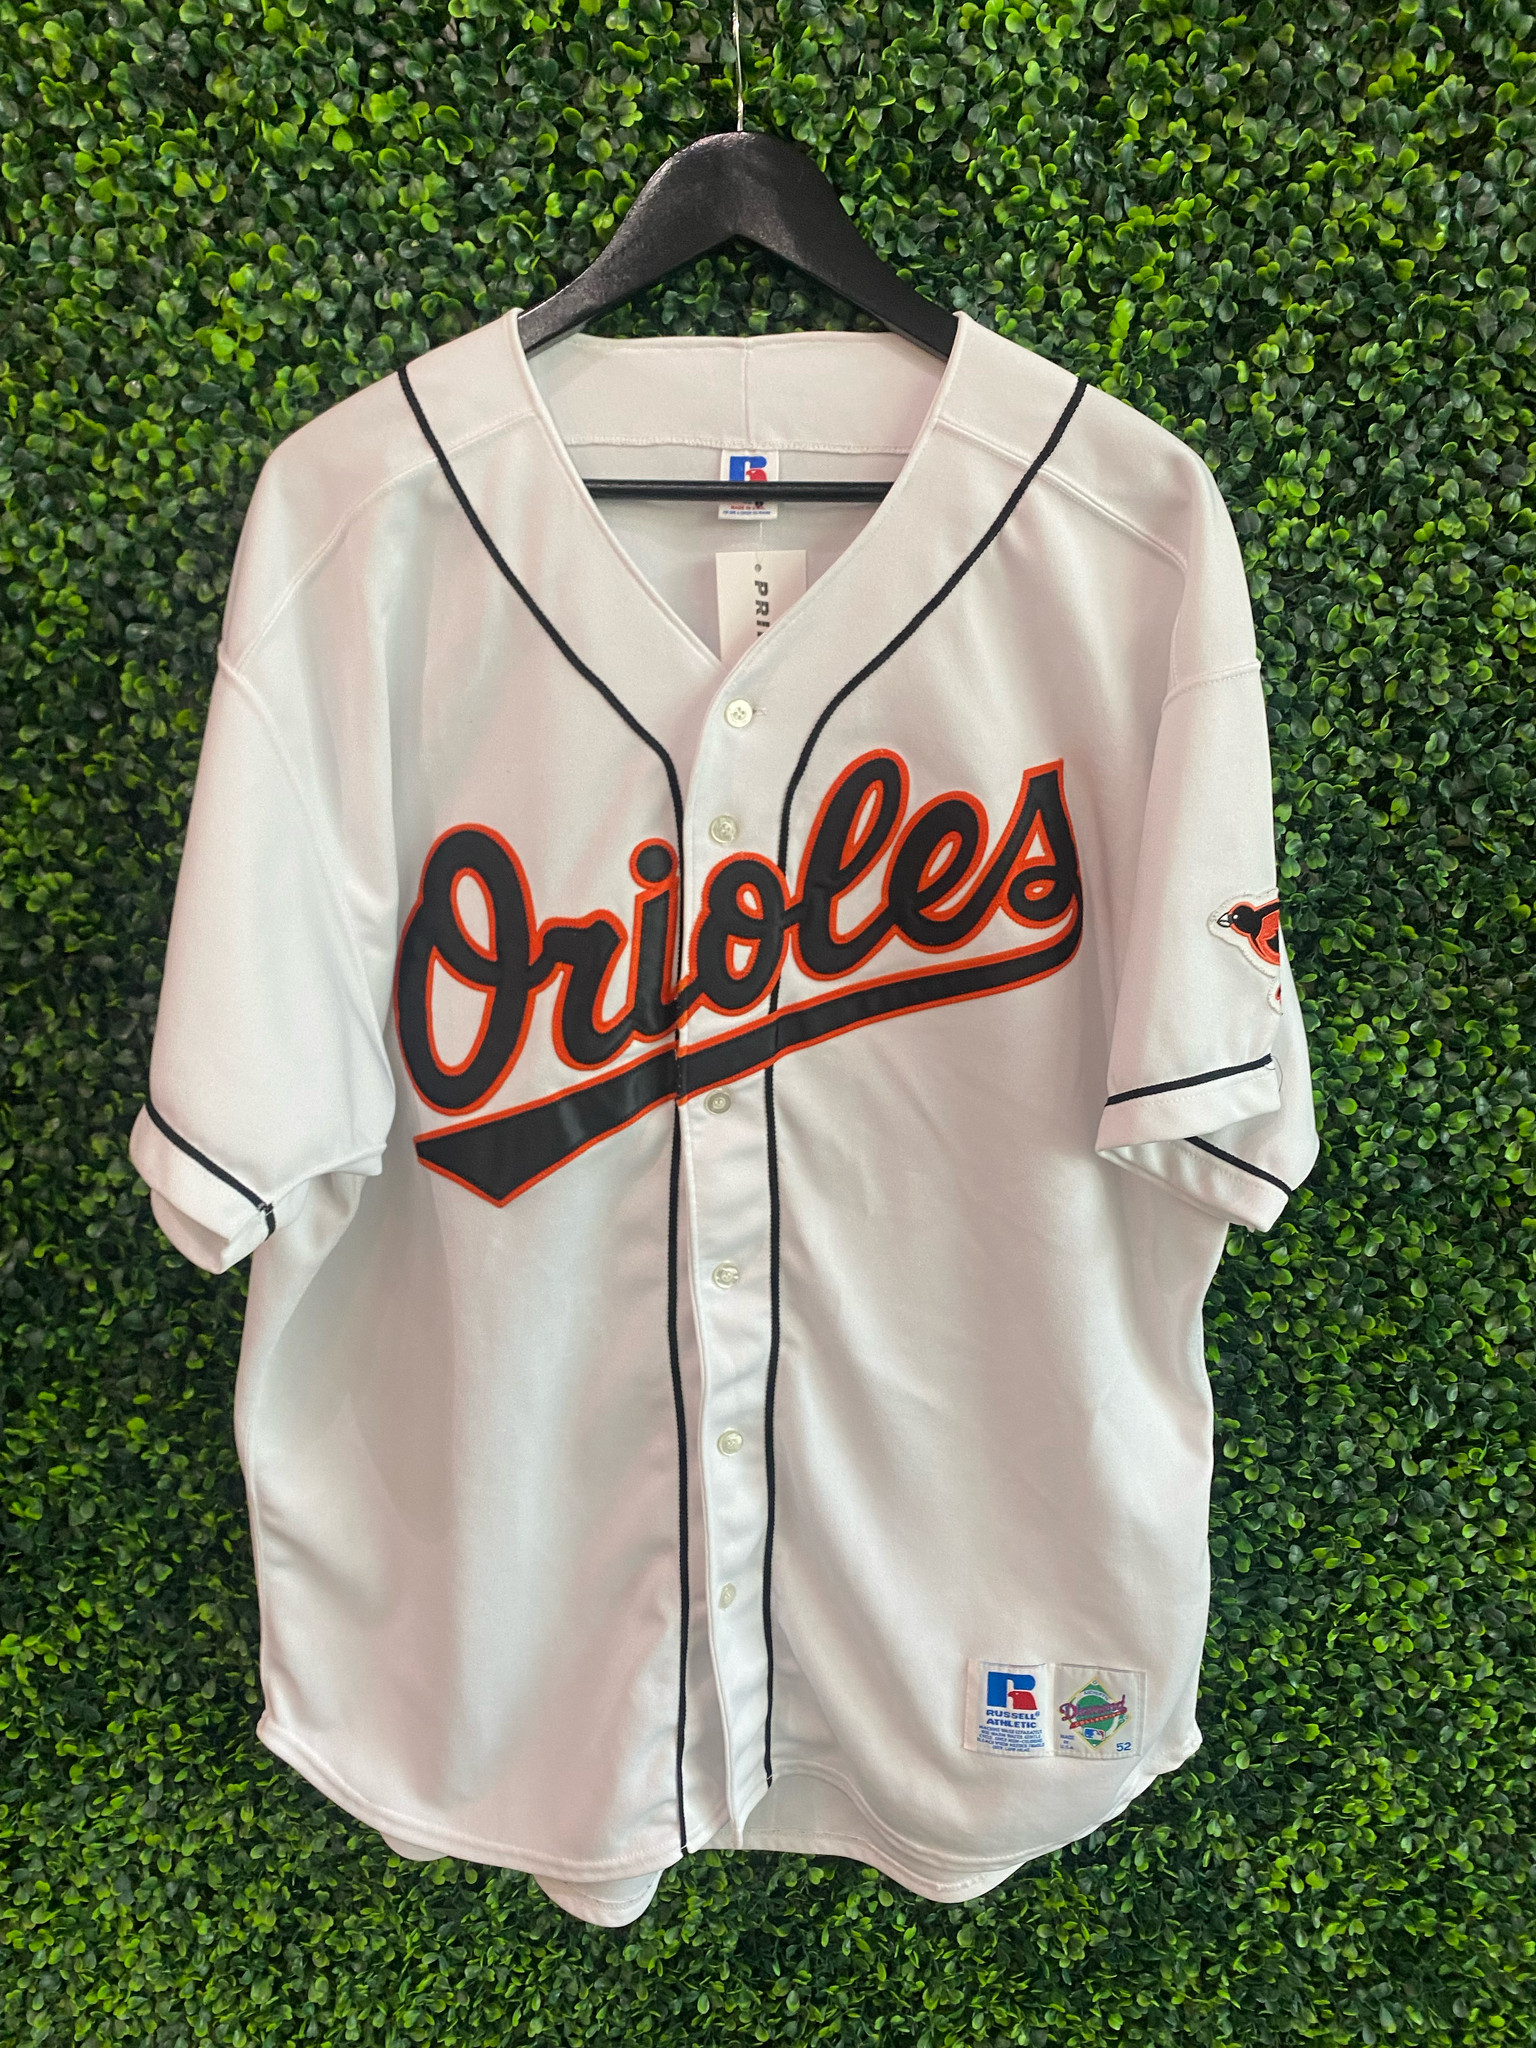 VINTAGE BALTIMORE ORIOLES RUSSELL ATHLETIC JERSEY - Primetime